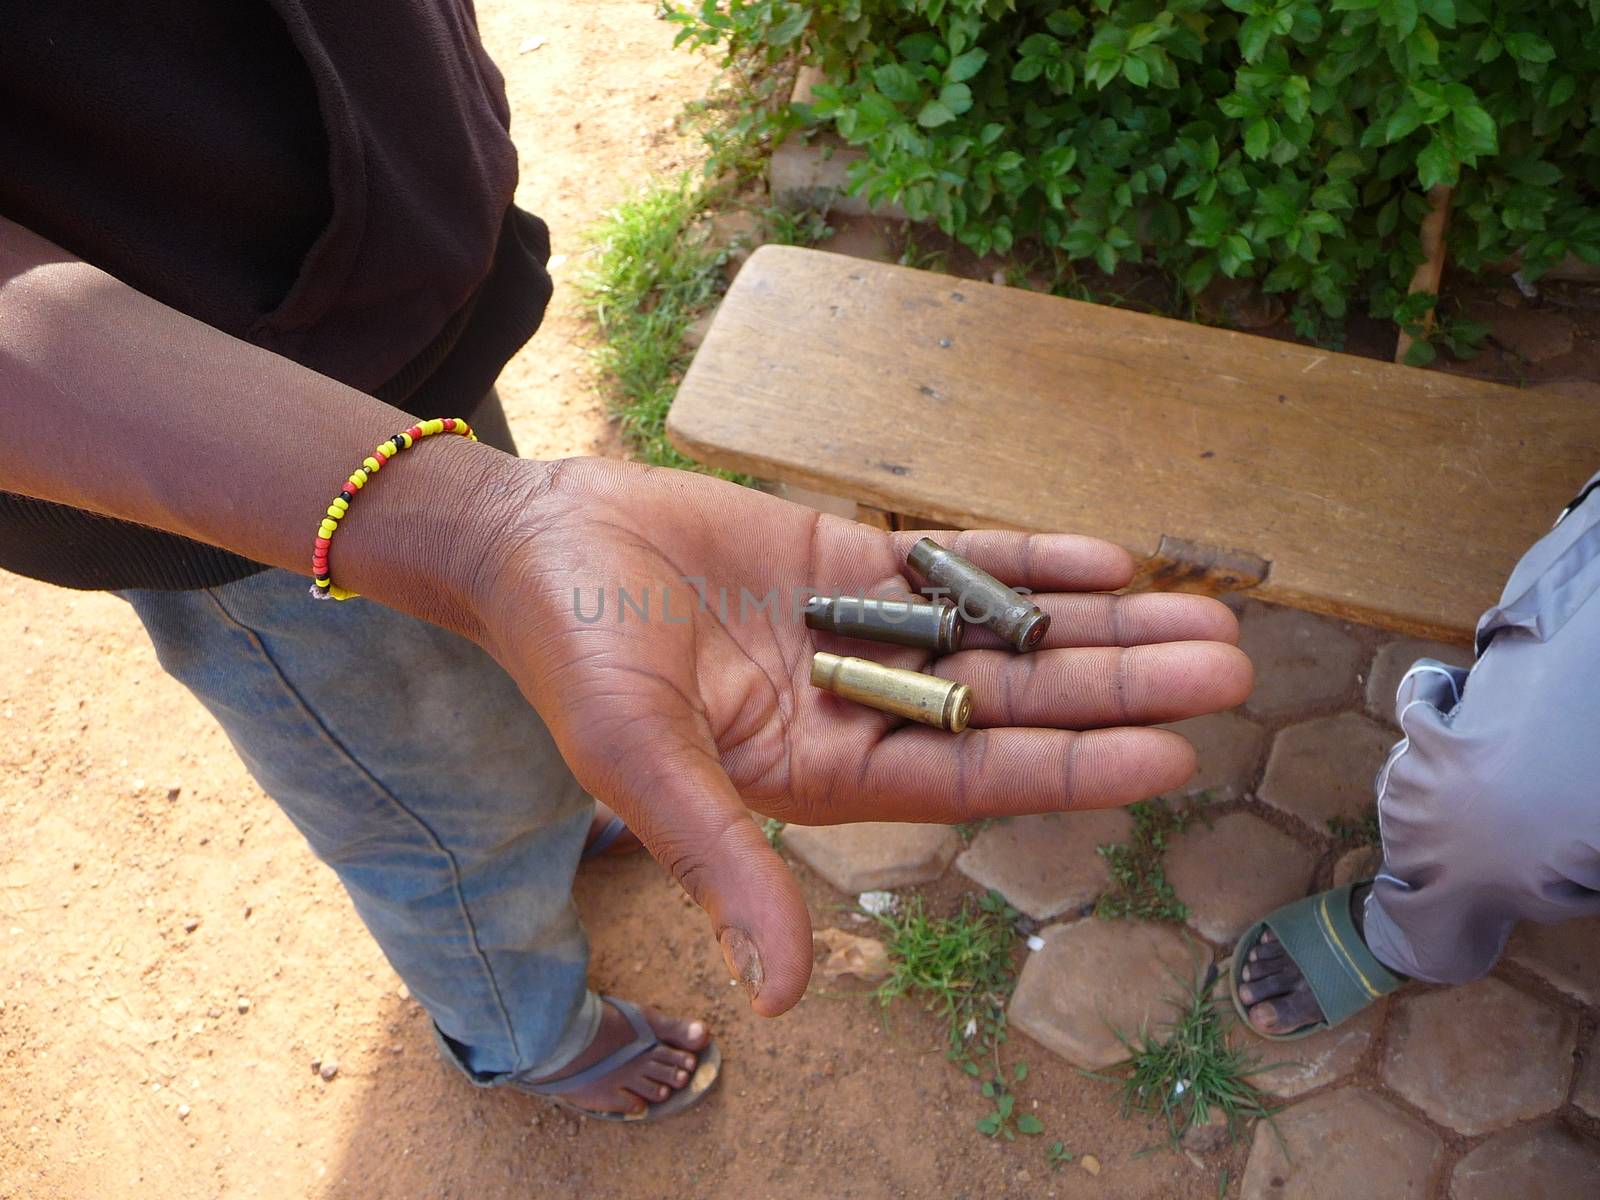 BURKINA FASO, Ouagadougou : A man shows cartridge cases in Ouagadougou, Burkina Faso, on September 18, 2015. Protests have sparked in Ouagadougou after Presidential guard officers seized power in a coup.